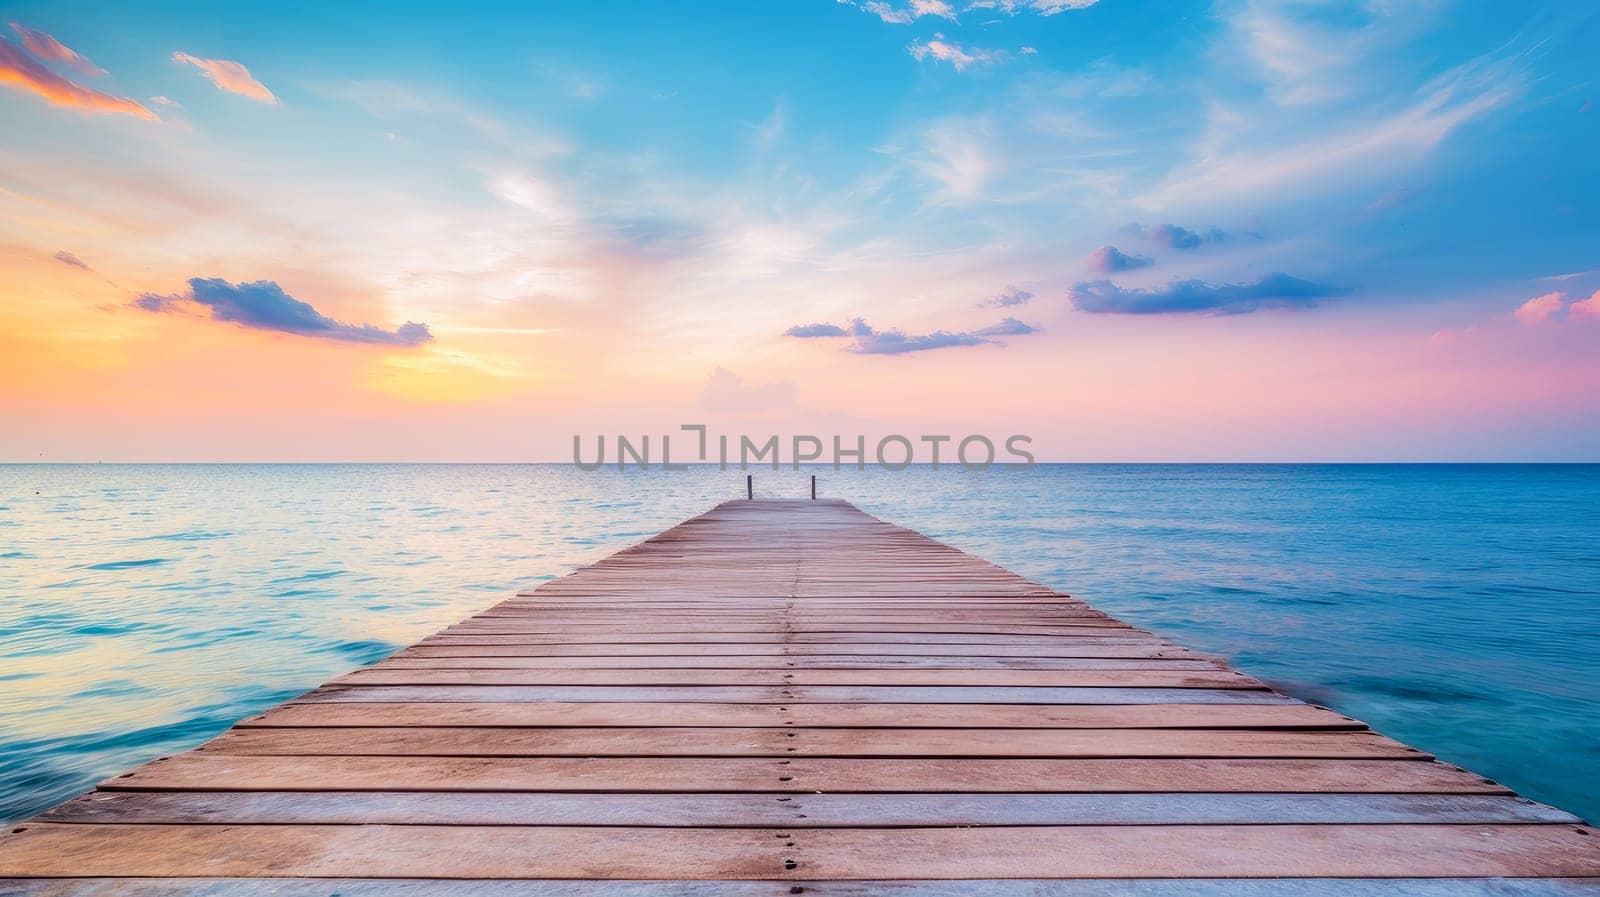 Beautiful beach with a wooden pier and azure water in the Maldives, islands. Beautiful landscape, picture, phone screensaver, copy space, advertising, travel agency, tourism, solitude with nature, without people